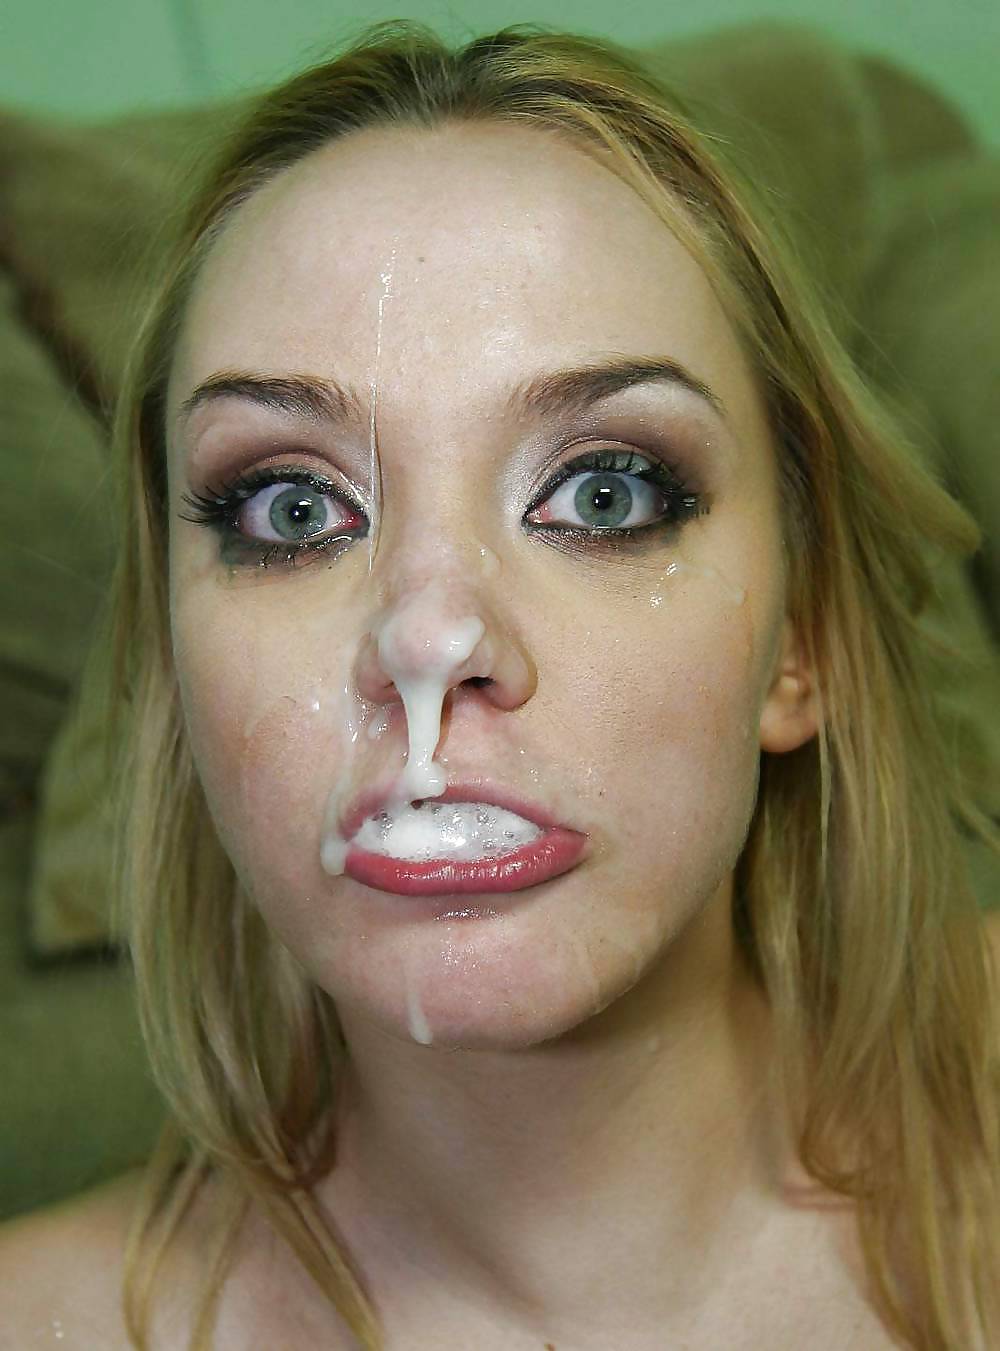 Free Great collection. sperm on her face photos